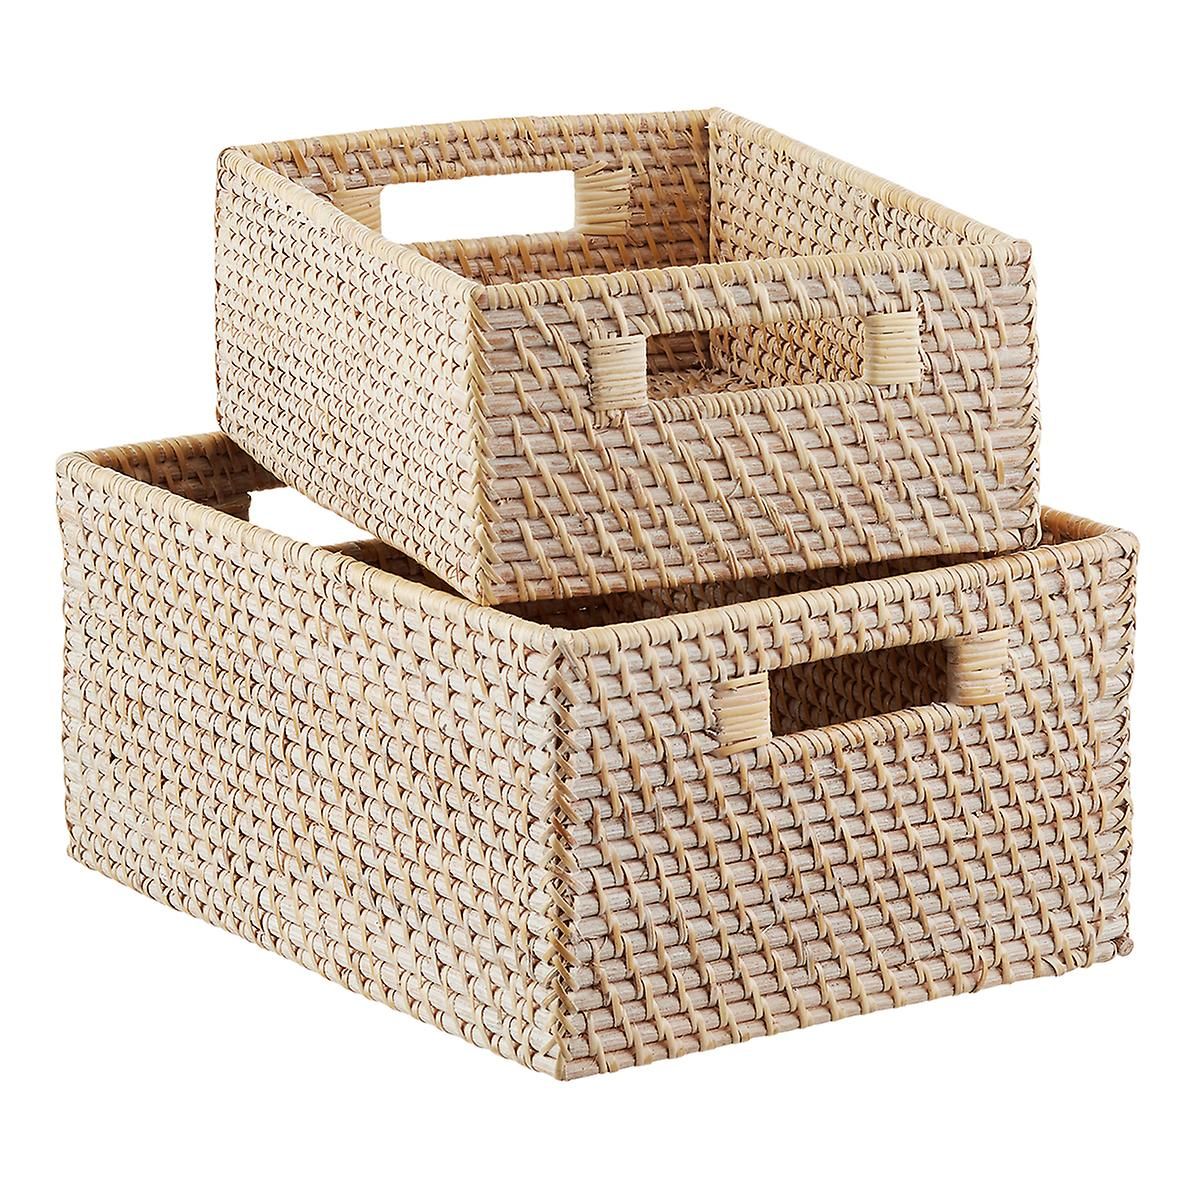 Whitewashed Rattan Storage Bins with Handles | The Container Store